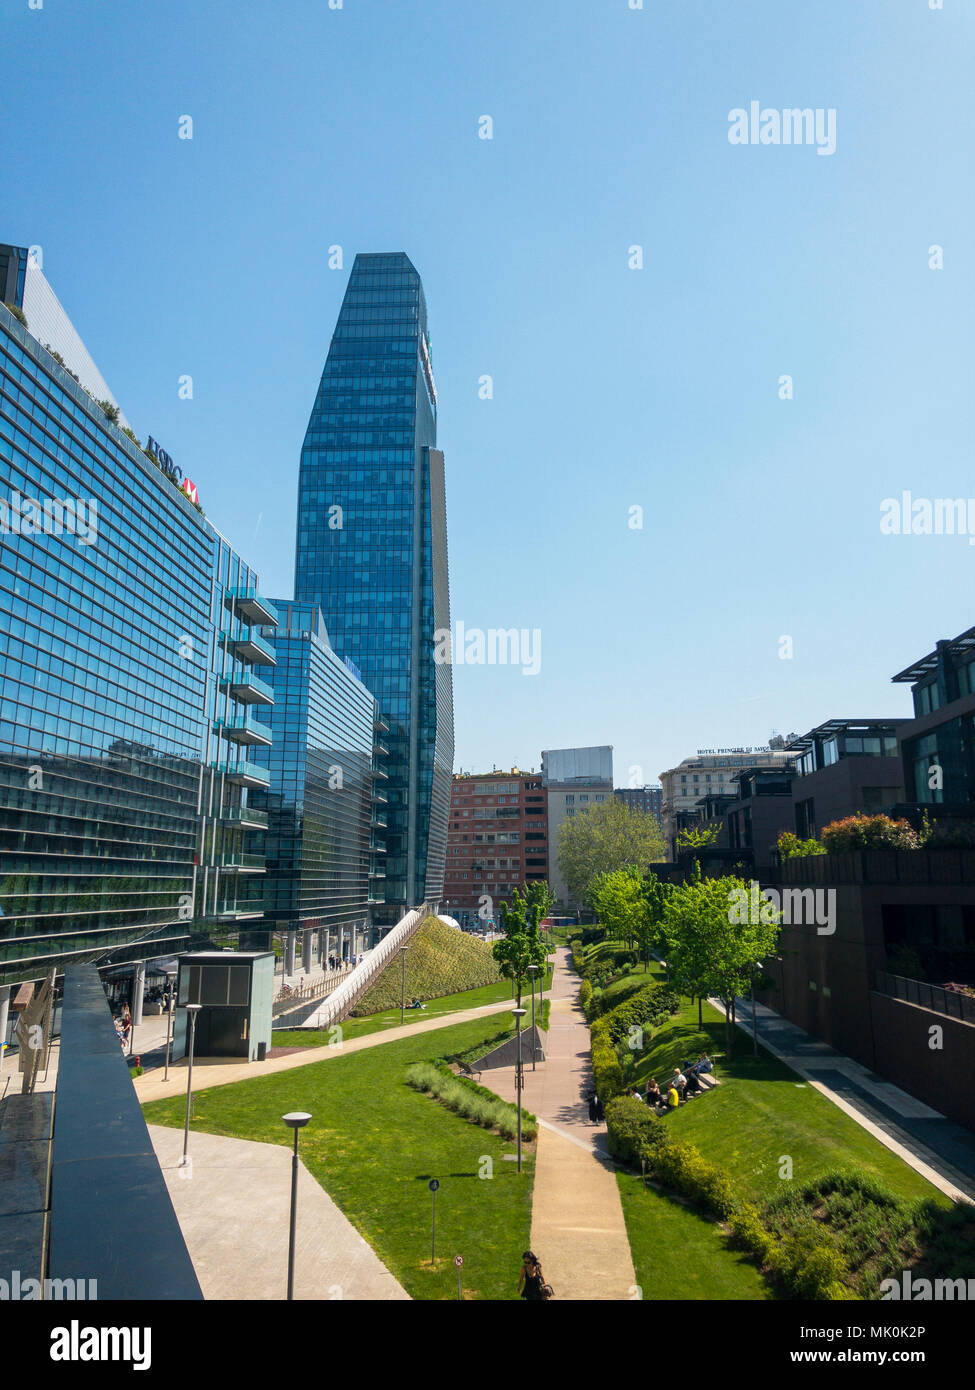 Diamond tower, Milan, Porta Nuova residenze, skyscraper, Italy, 22nd April 2018. Milan business district. View from the raised Alvar Aalto square Stock Photo